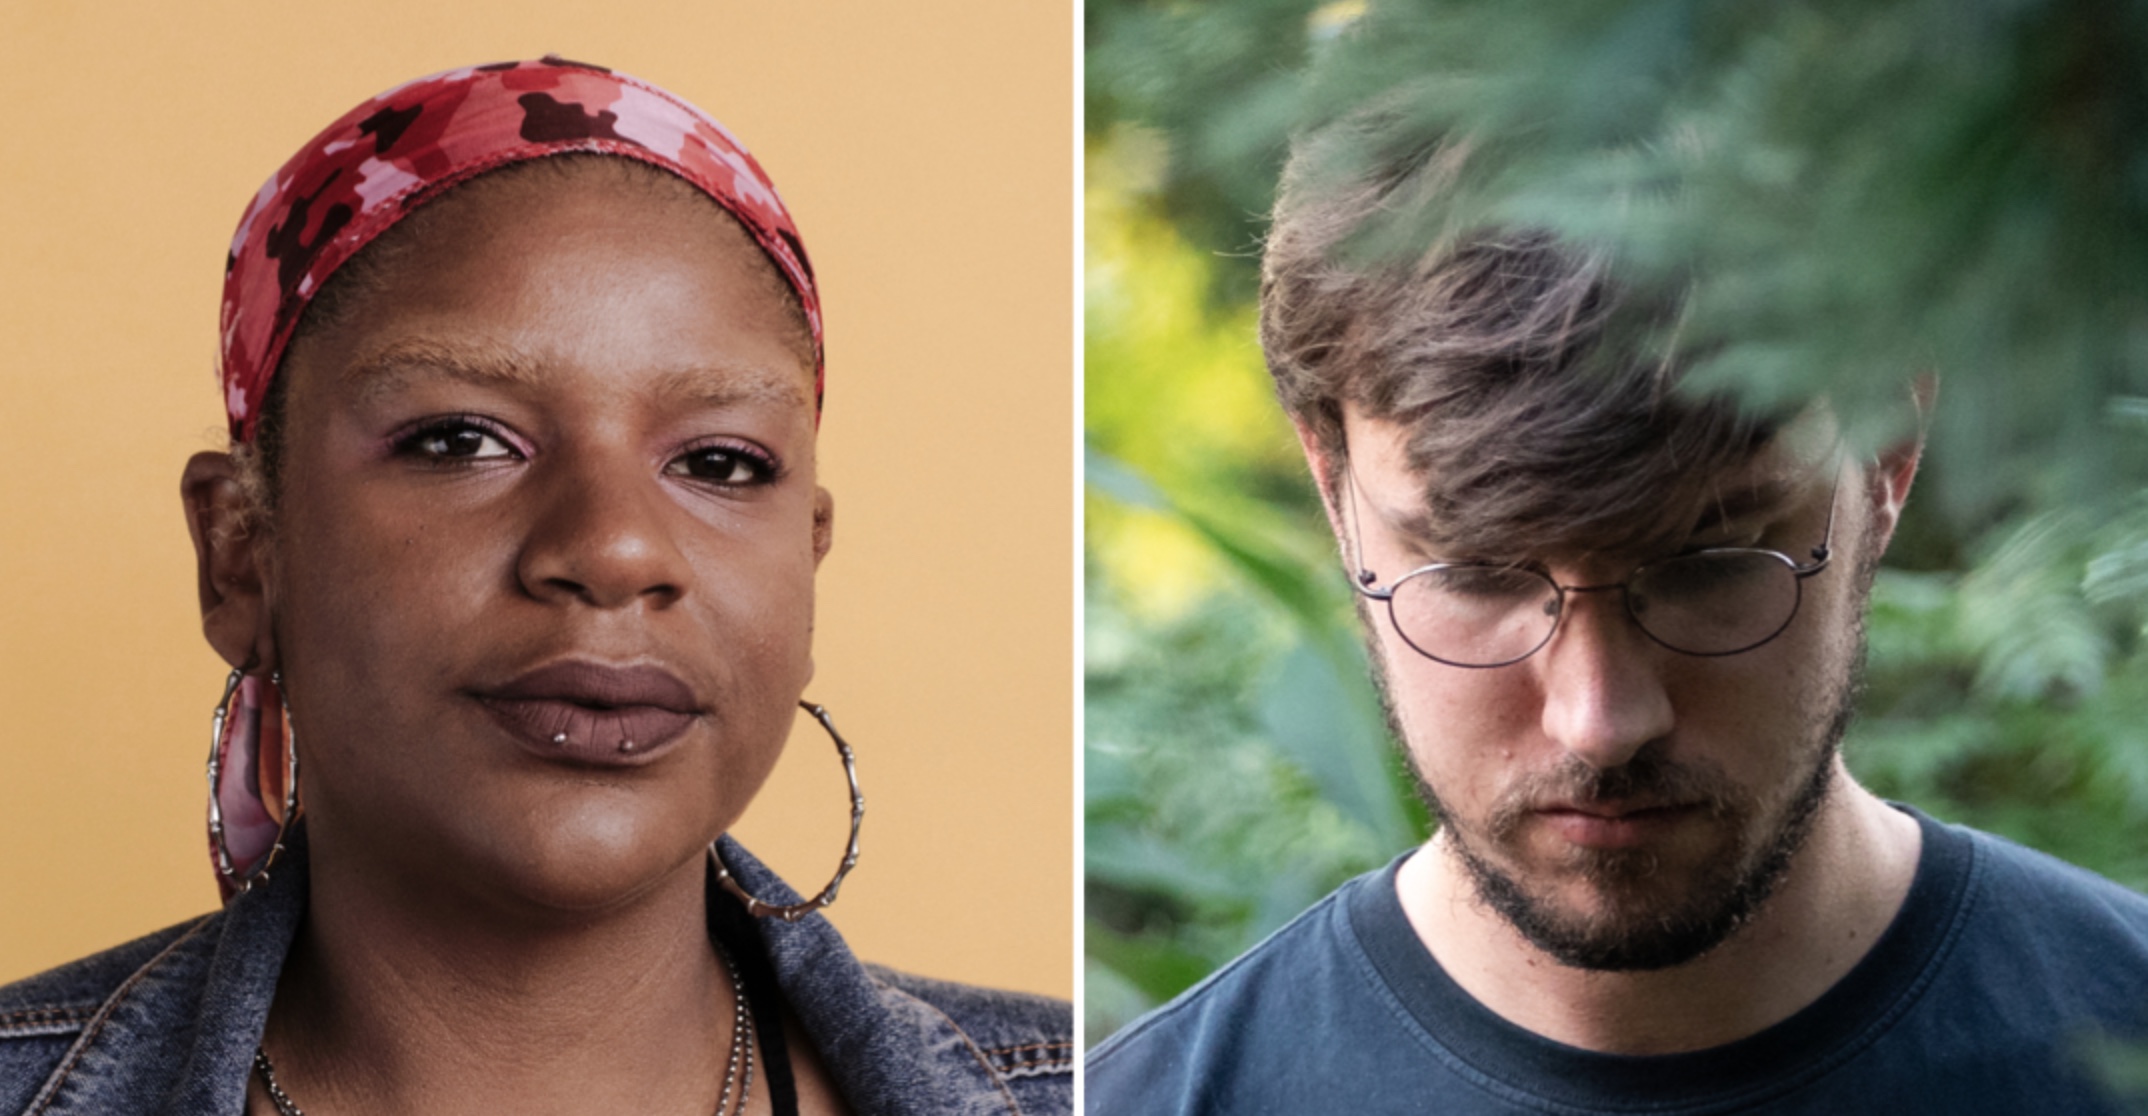 Two photographs side by side. On the left is Muse Dodd, a brown skinned, Black, non-binary person with blonde eyebrows, wears a red camo durag while gazing at the camera and stands in front of a mustard backdrop. Their photograph is by Landon Spears. On the right is a photograph of Rob Cosgrove, looking down surrounded by trees.